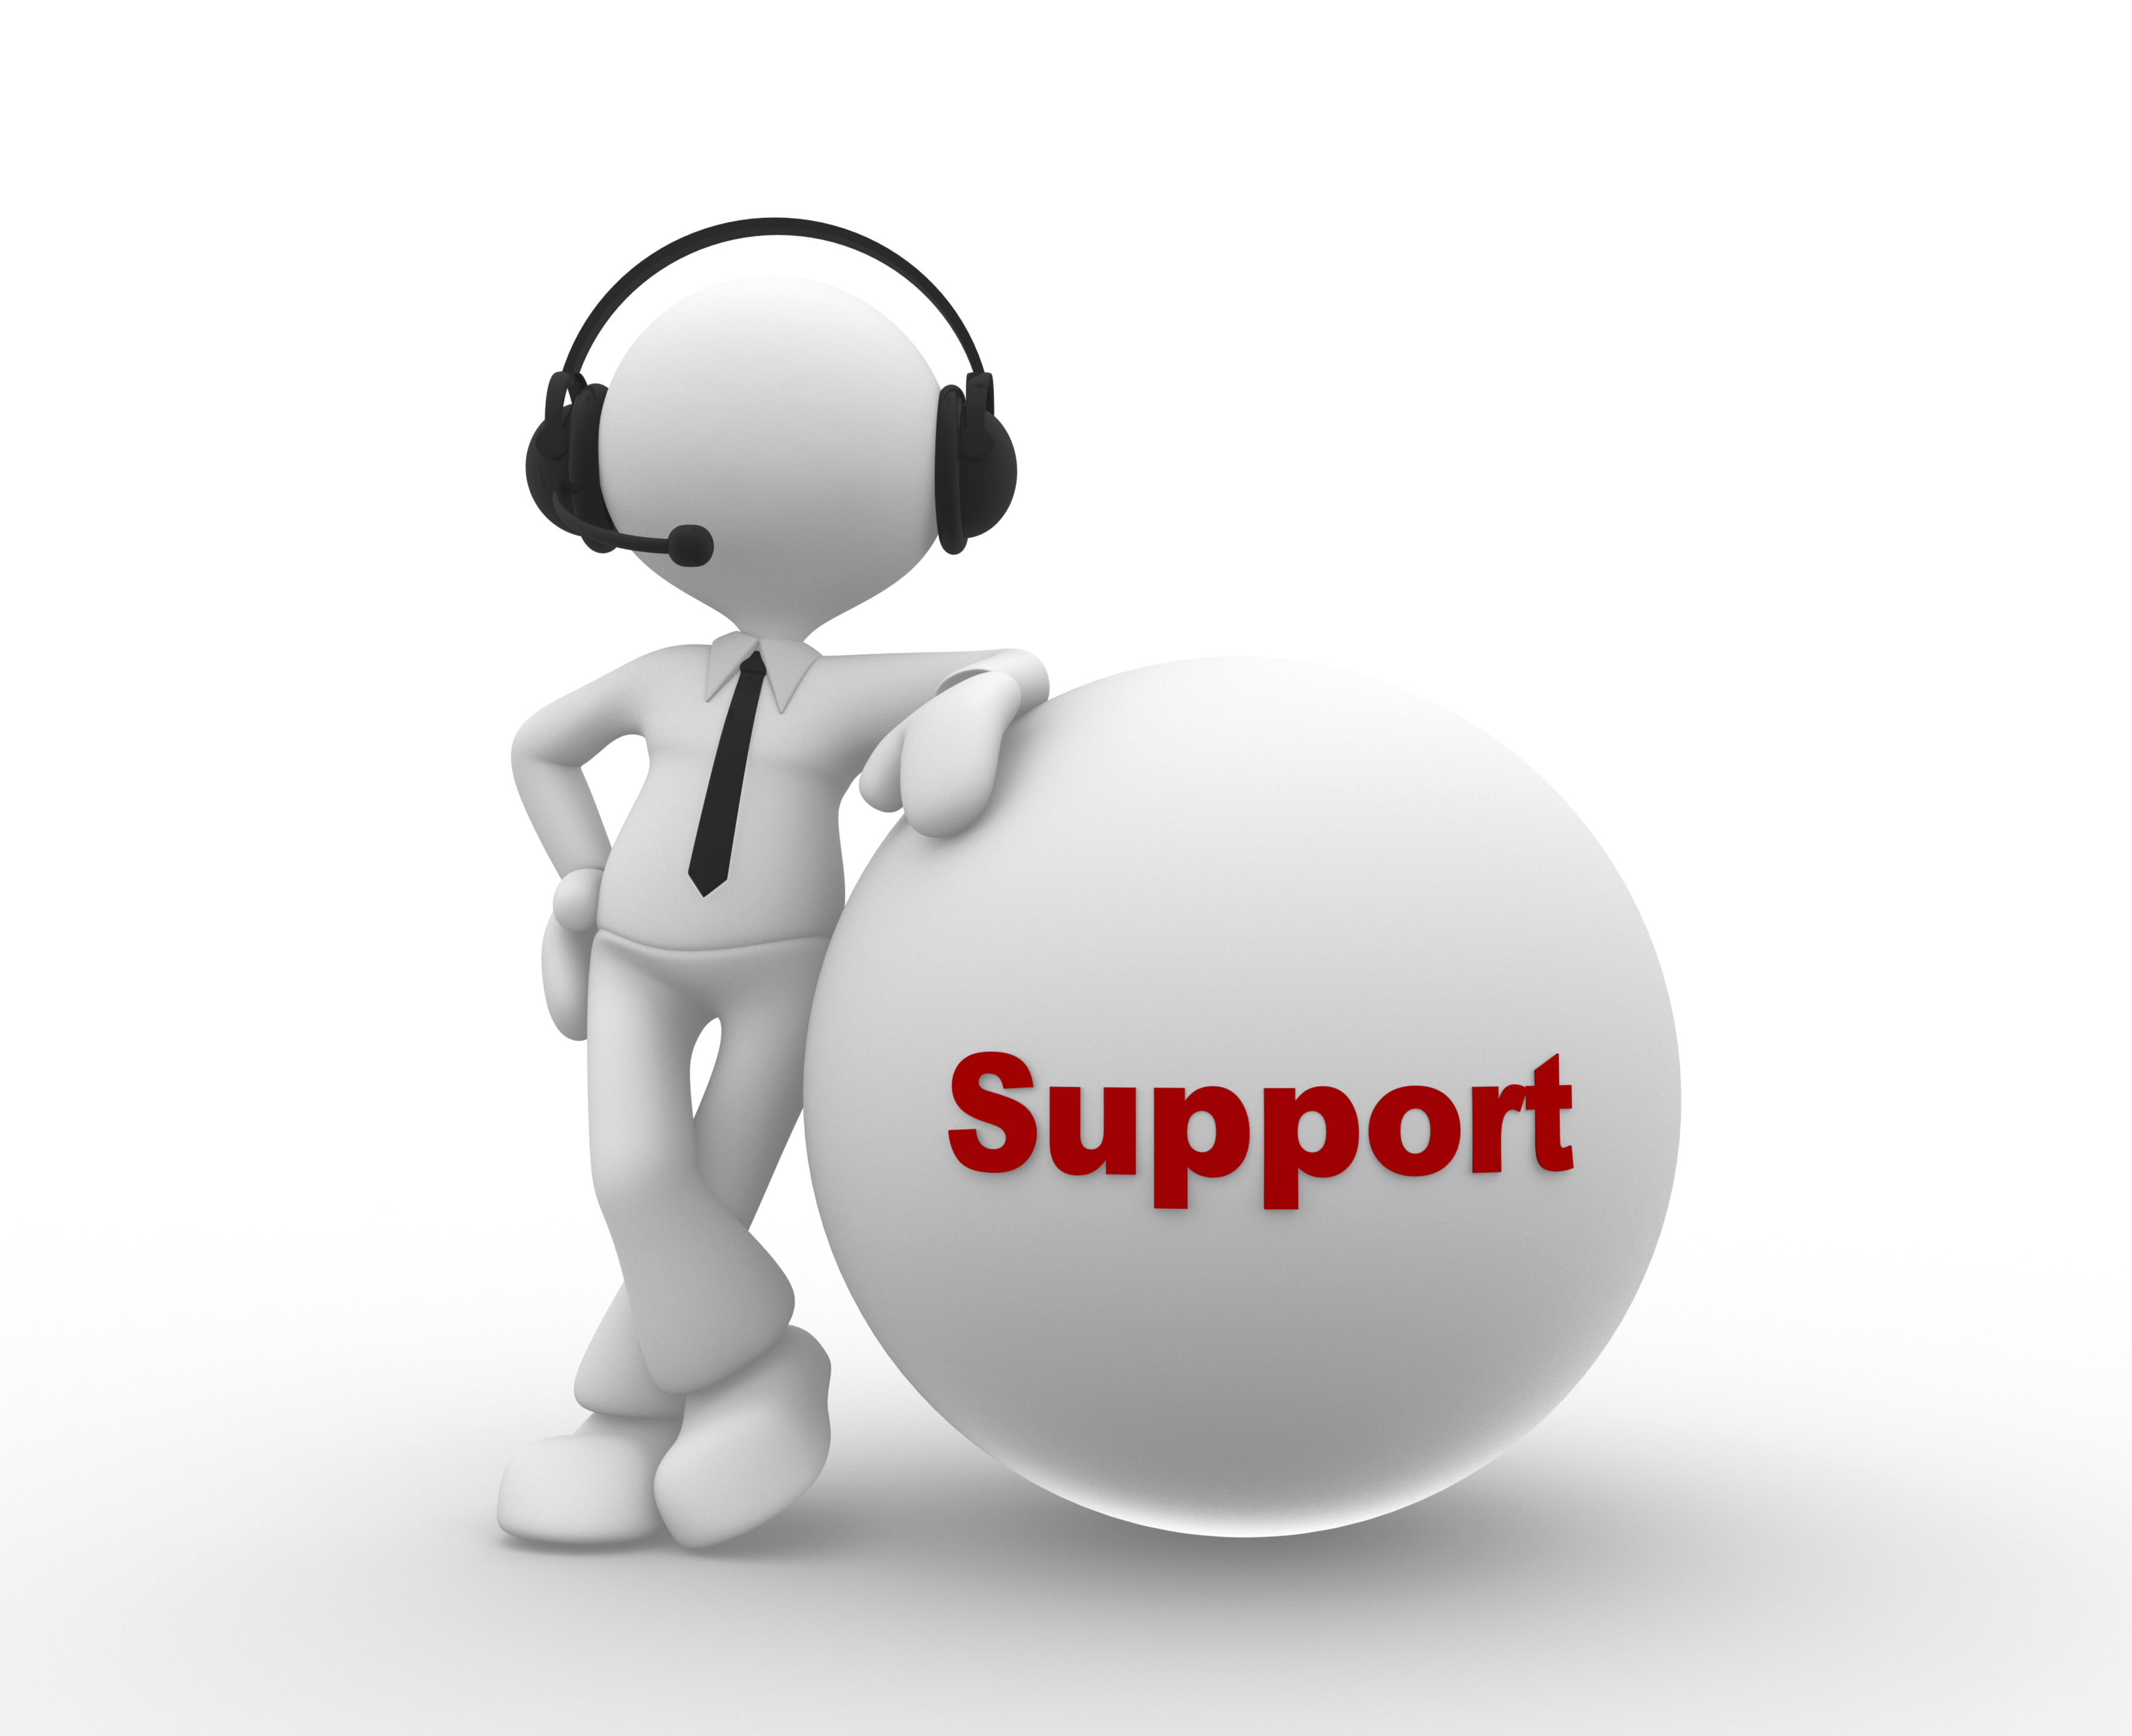 phone support clipart - photo #41